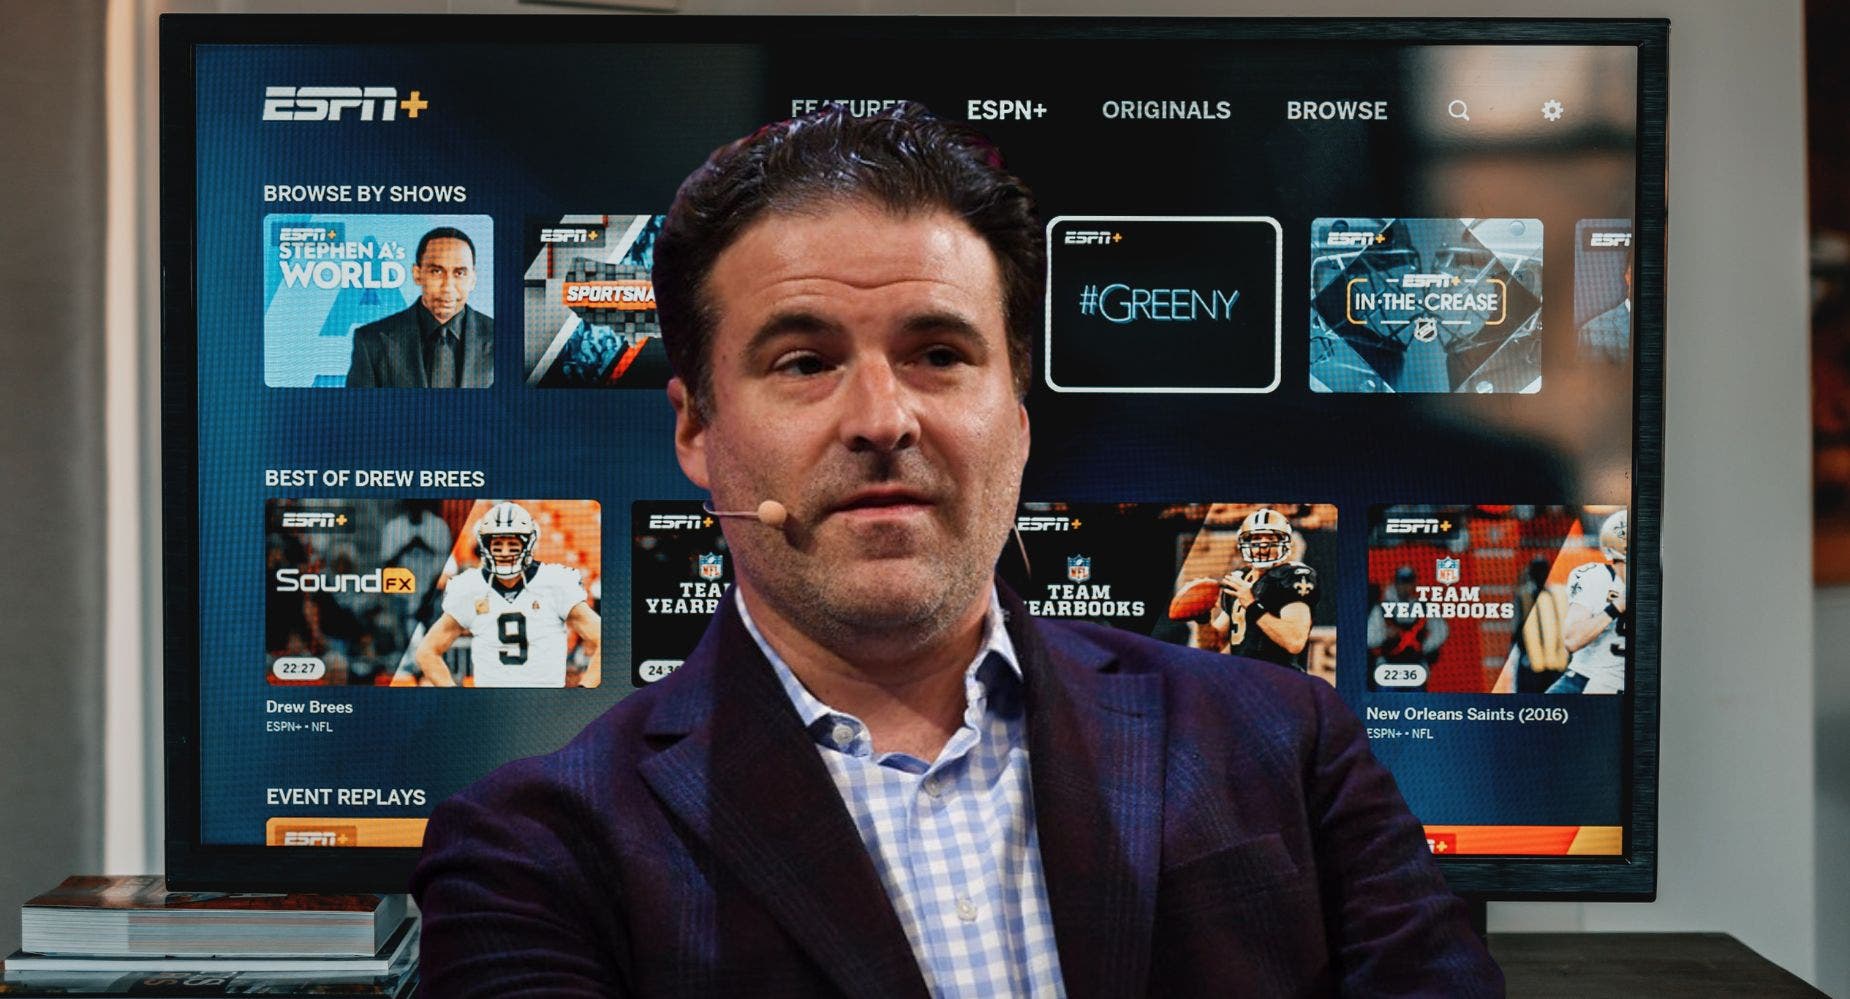 EXCLUSIVE: Darren Rovell Says ESPN Should Be Worried About Streaming Companies Entering Sports, Especially This Tech Giant